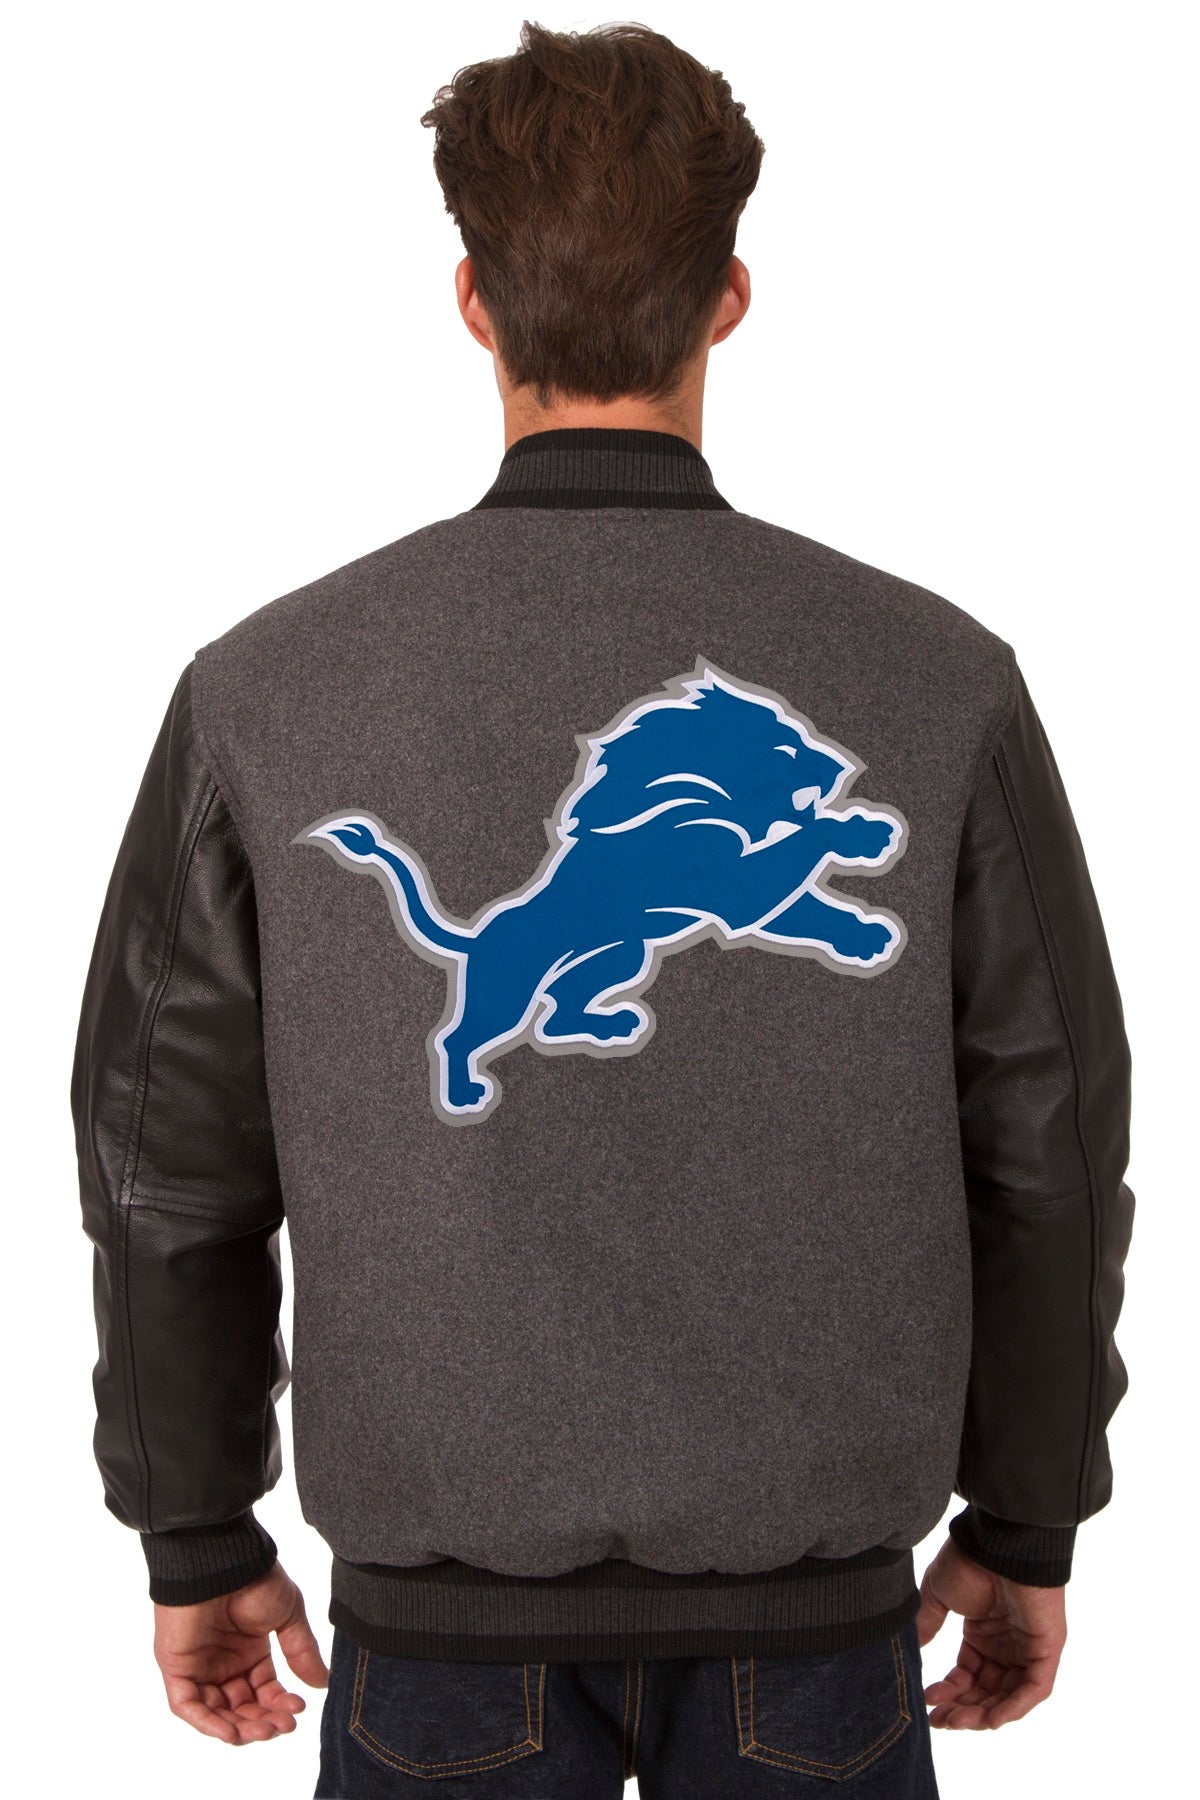 Detroit Lions Wool & Leather Reversible Jacket w/ Embroidered Logos ...